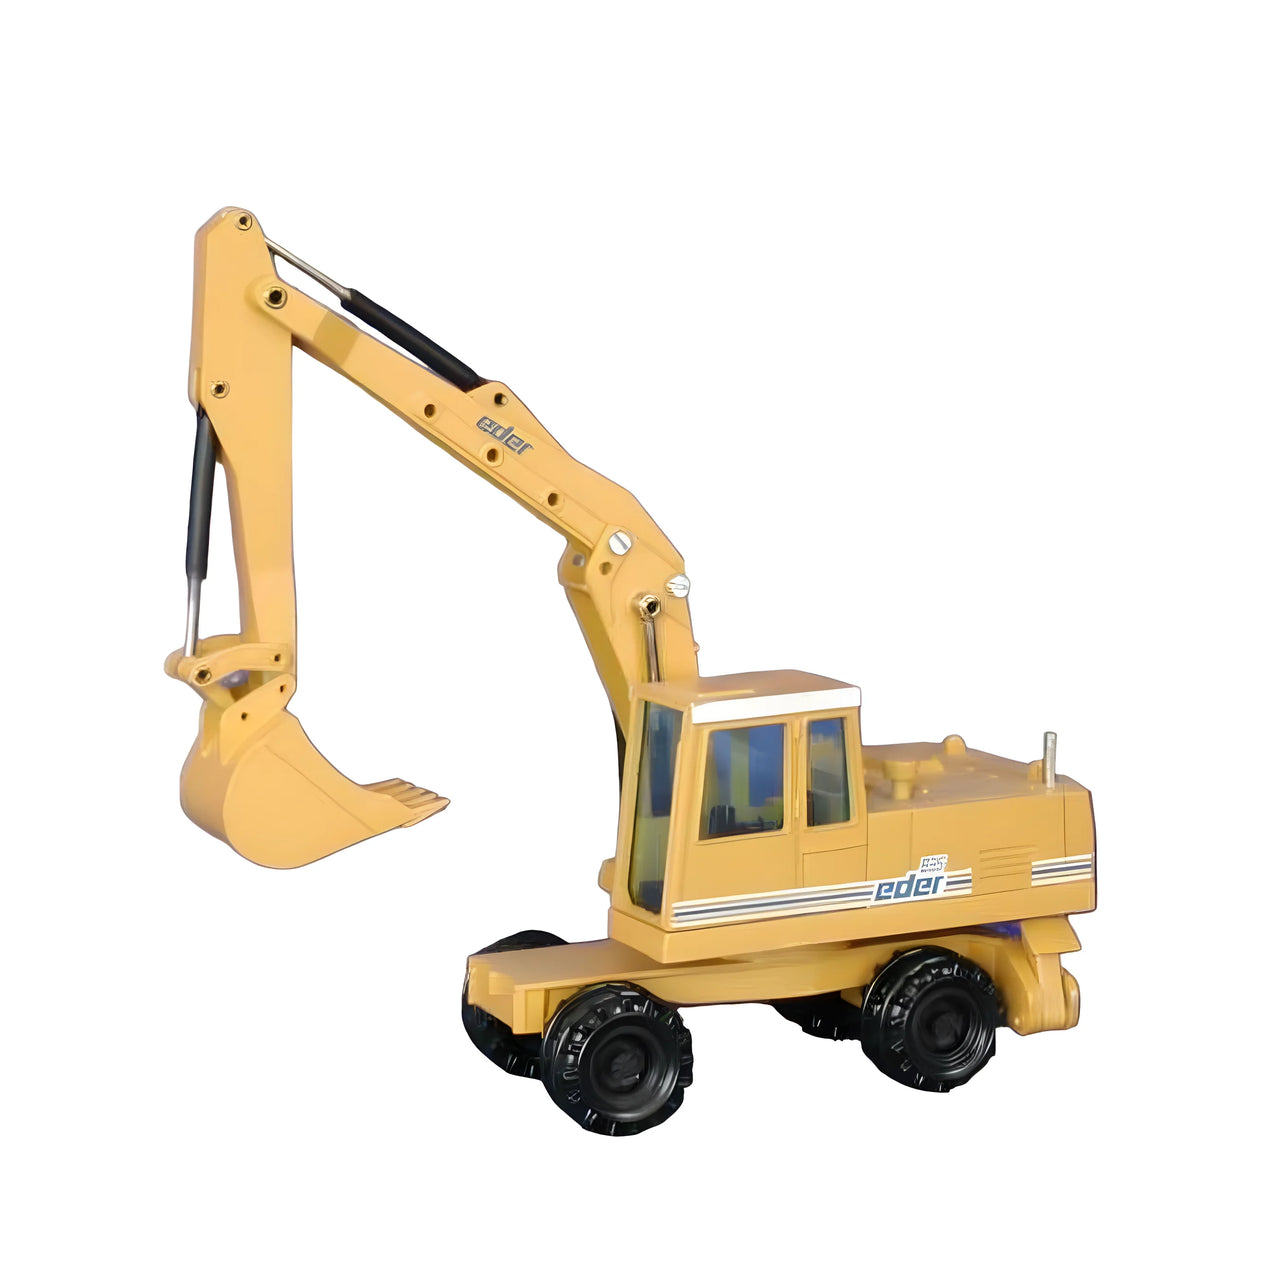 239 Eder M835 Wheeled Excavator 1:50 Scale (Discontinued Model)